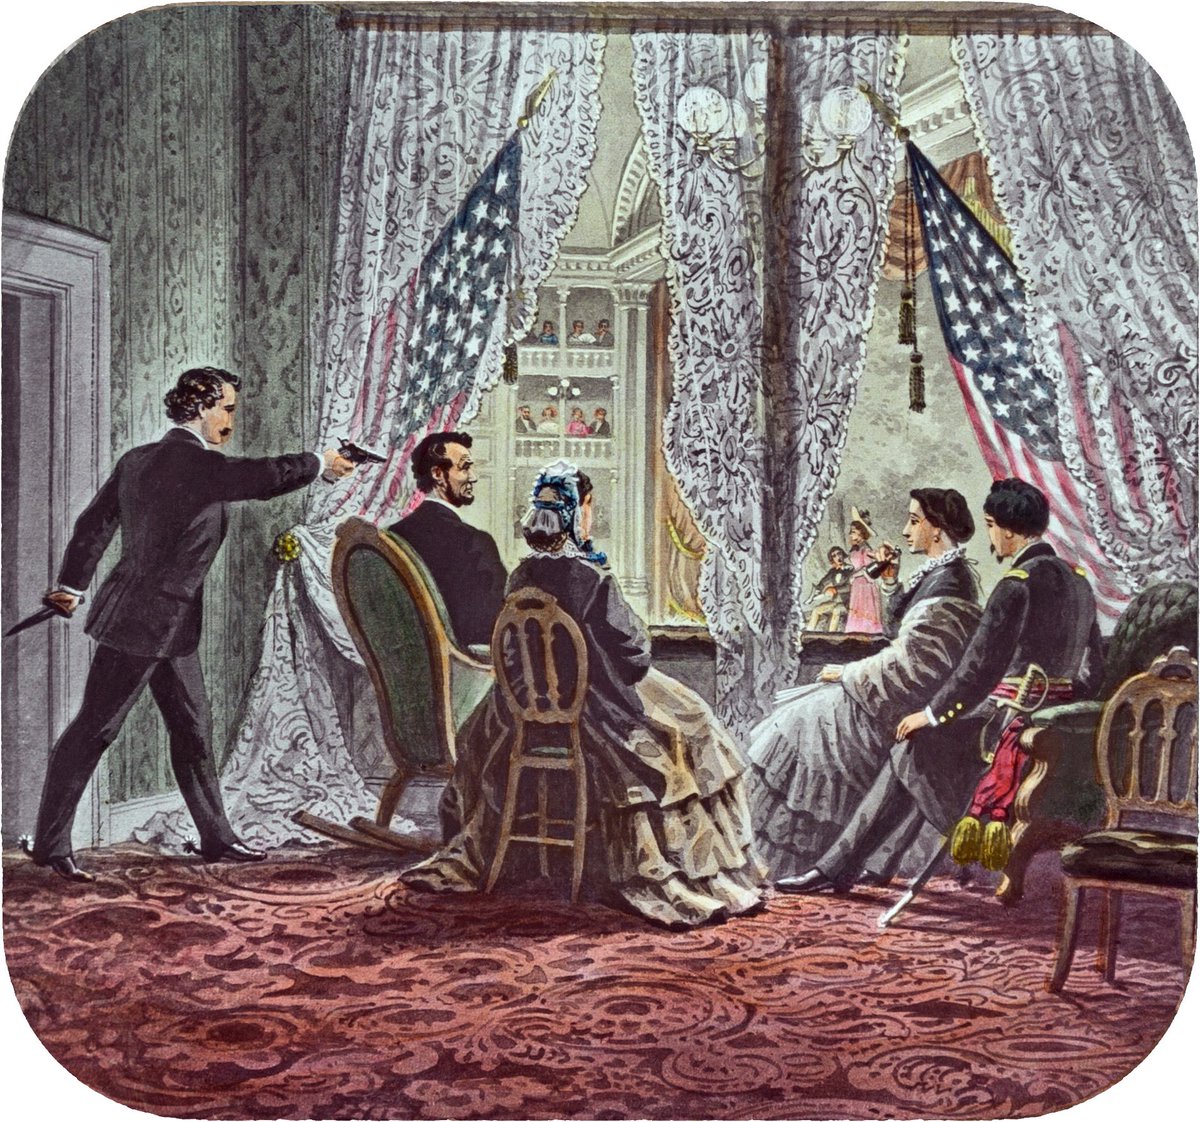 Shown in the presidential booth of Ford's Theatre, from left to right, are assassin John Wilkes Booth, Abraham Lincoln, Mary Todd Lincoln, Clara Harris, and Henry Rathbone